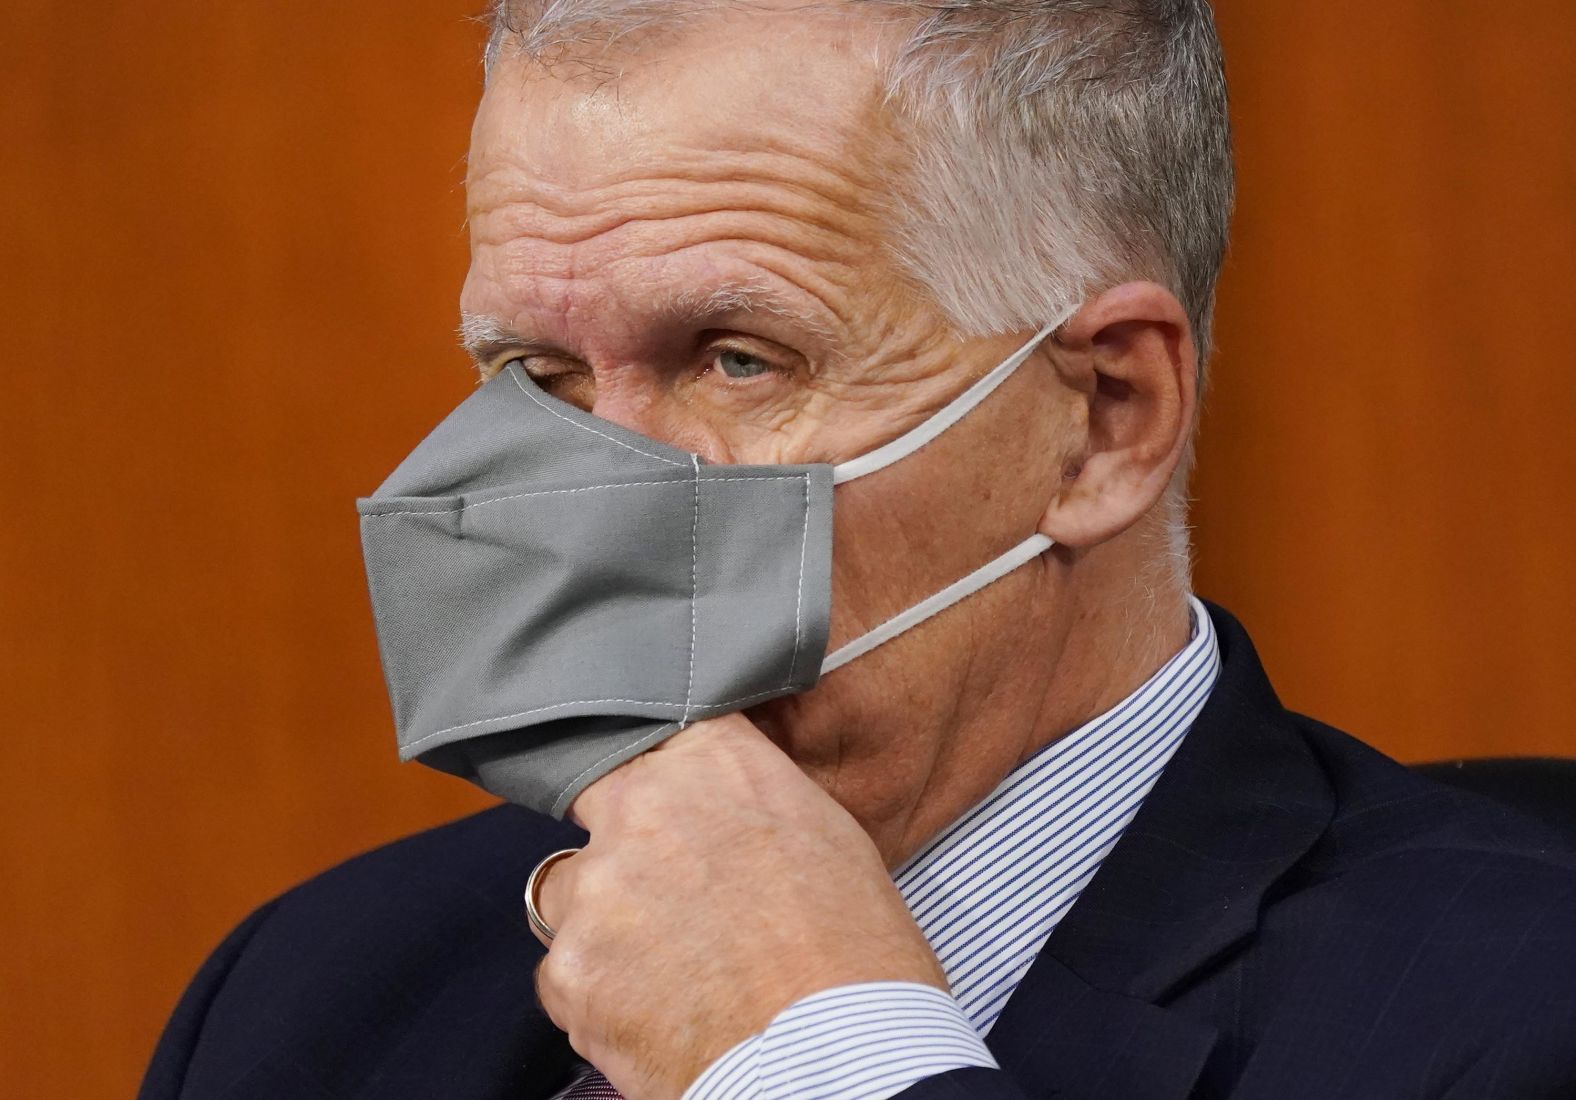 US Sen. Thom Tillis, a Republican from North Carolina who recently tested positive for Covid-19, puts his hand under his face mask while Barrett testifies on October 13. Tillis announced during the hearing <a href="index.php?page=&url=https%3A%2F%2Fwww.cnn.com%2Fpolitics%2Flive-news%2Famy-coney-barrett-hearing-10-13-20%2Fh_f9d73bf080cc3318f415820f38023d62" target="_blank">that he's participating in two studies.</a> He said he enrolled in the studies during his time in quarantine. "Because this is being aired, I hope anyone who has recovered from Covid will do their part to try heal this country from the health challenges that Covid has presented us," Tillis said. "I intend to do my part."